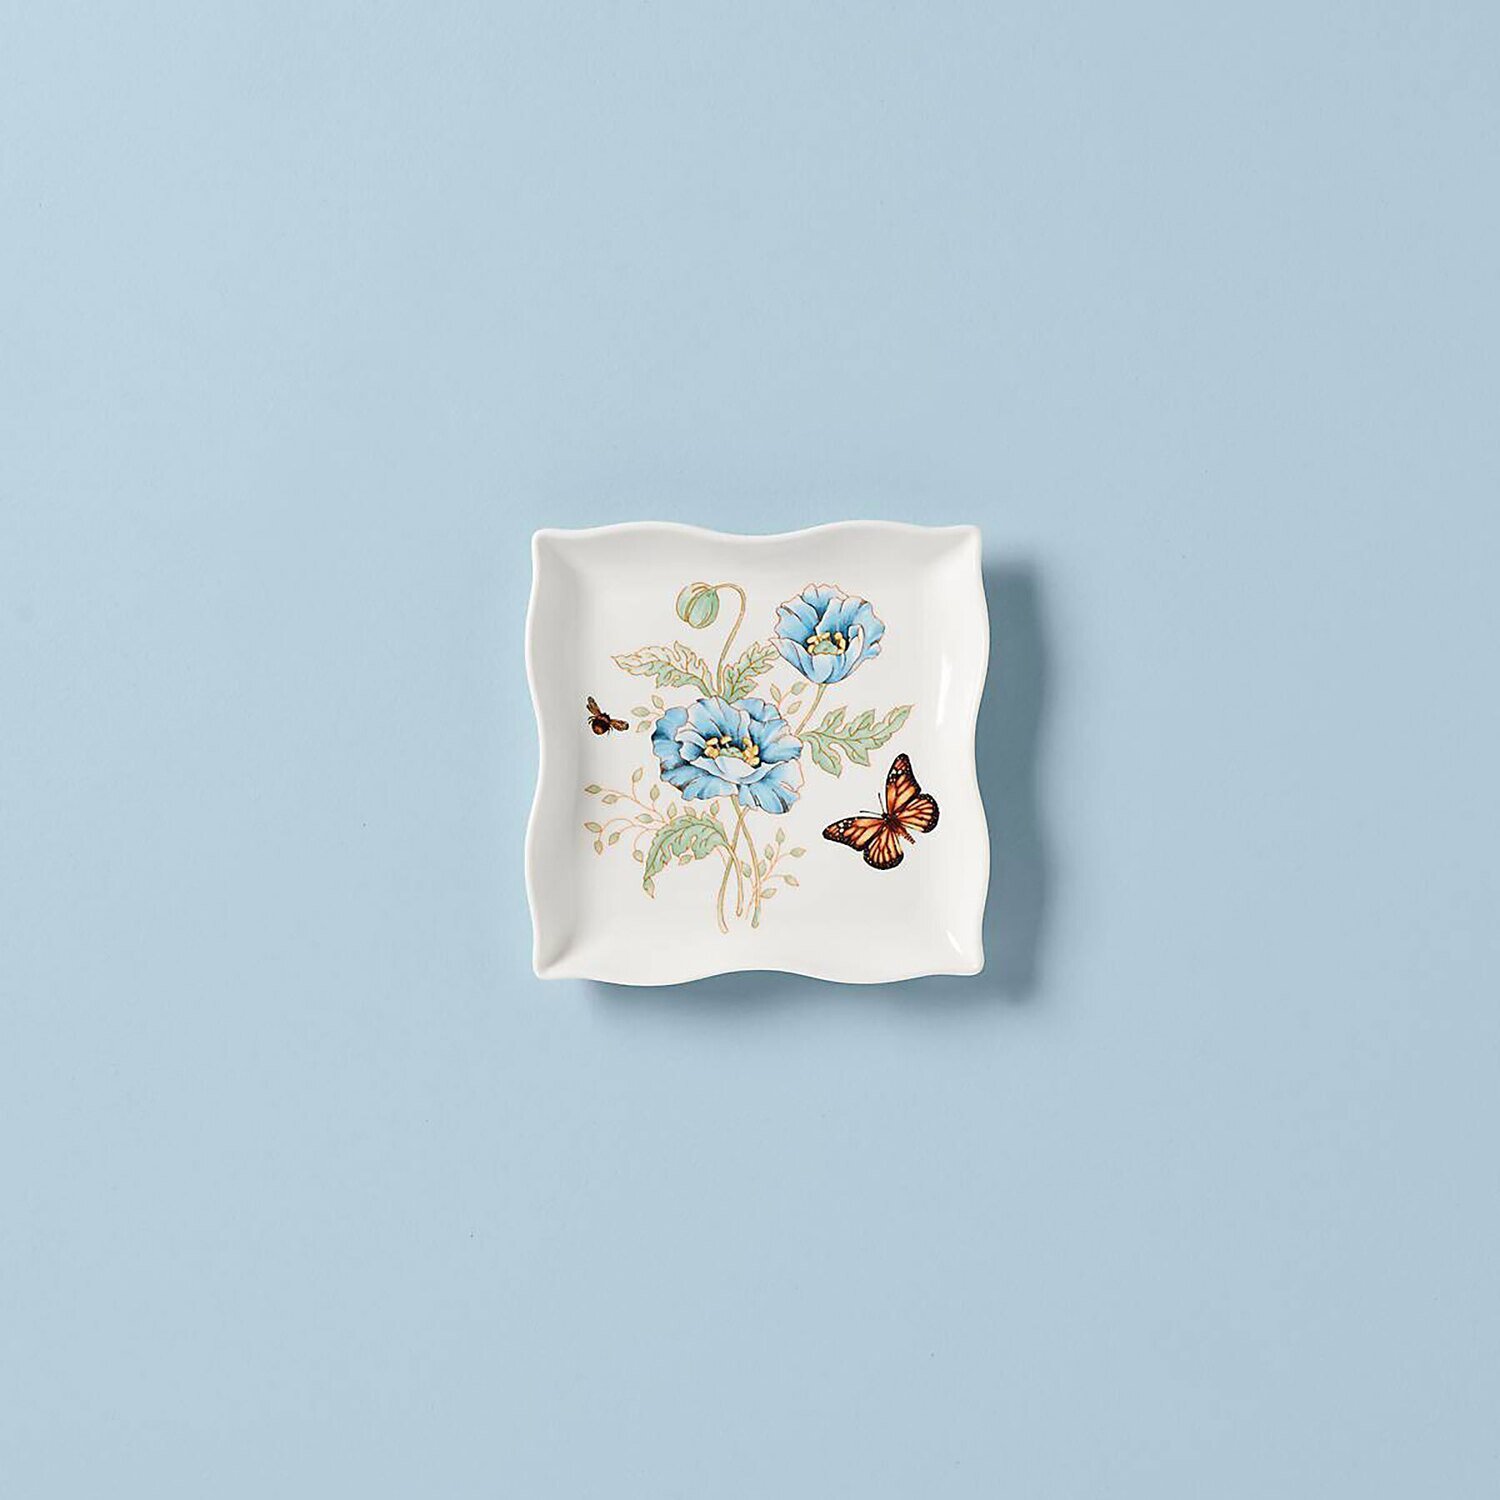 Lenox Butterfly Meadow Square Dish 887964